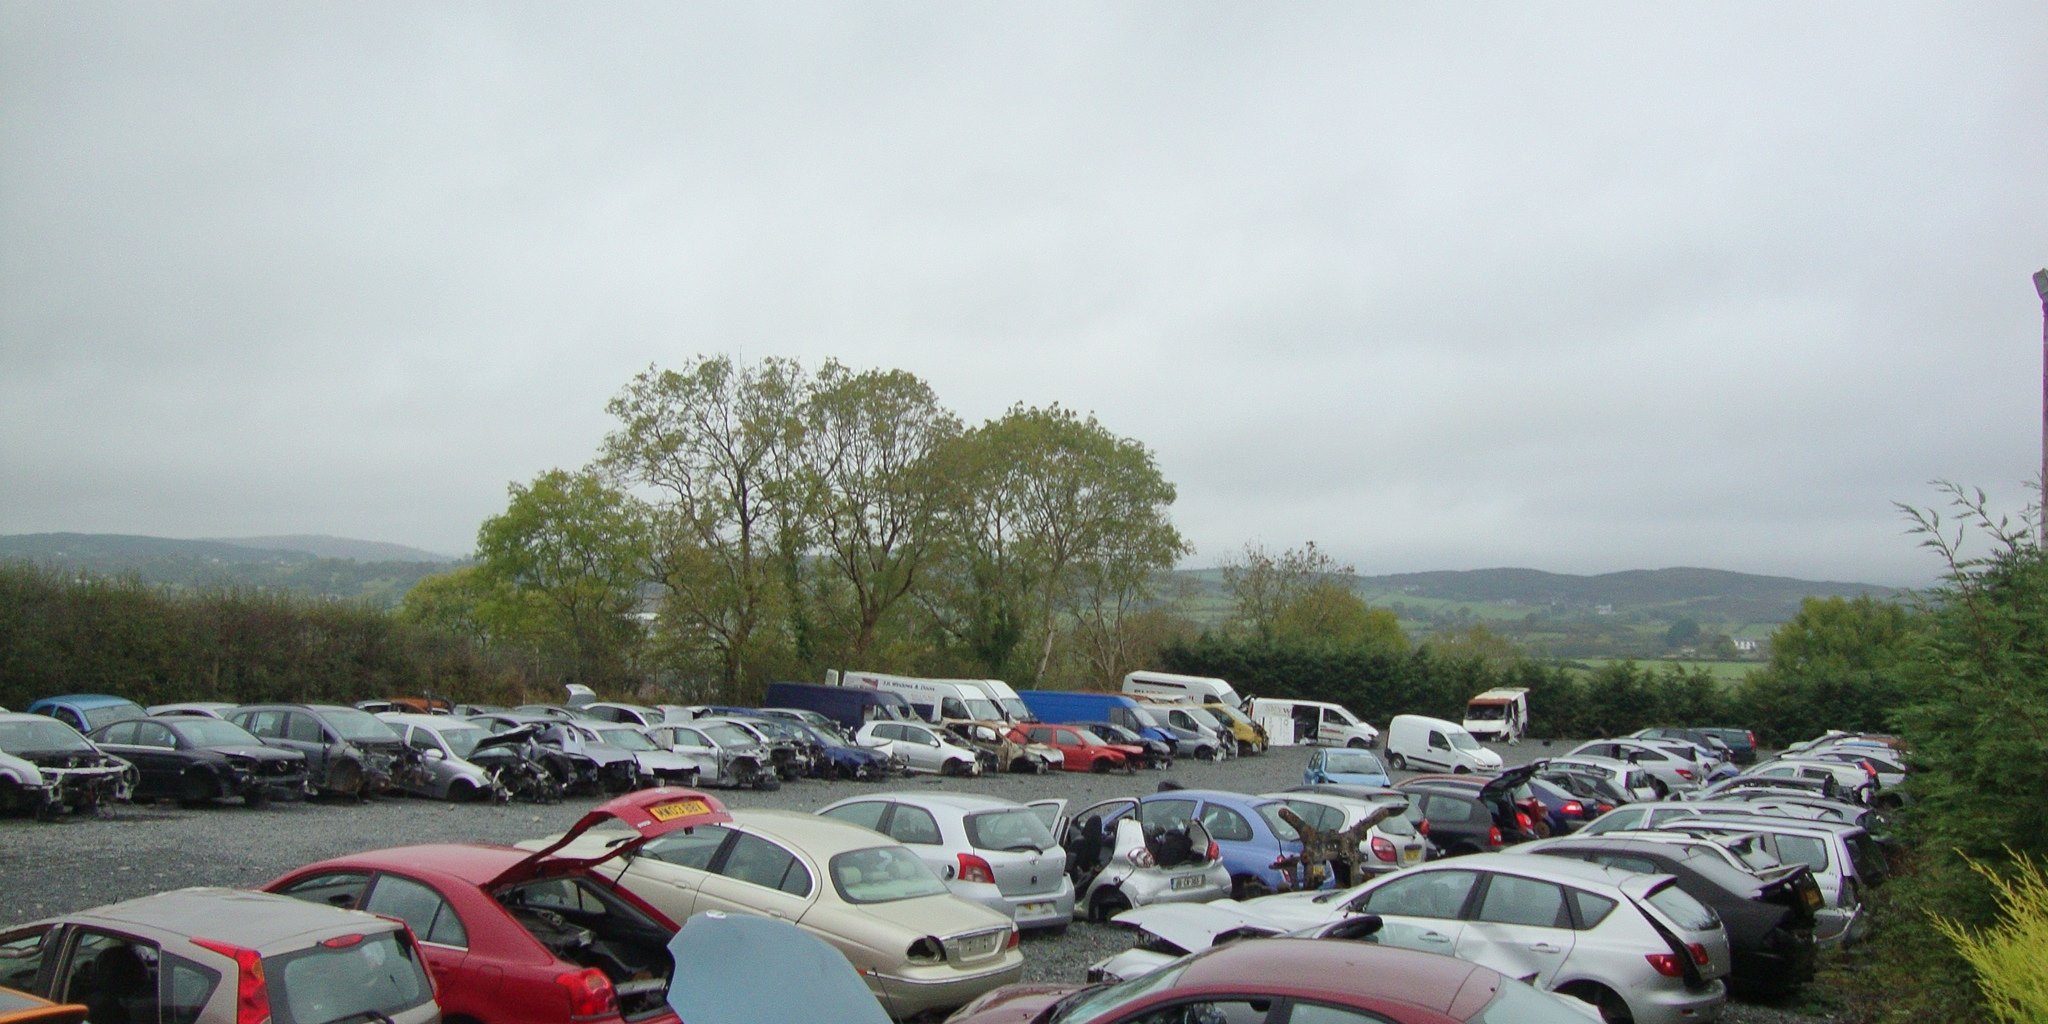 yard with various vehicles